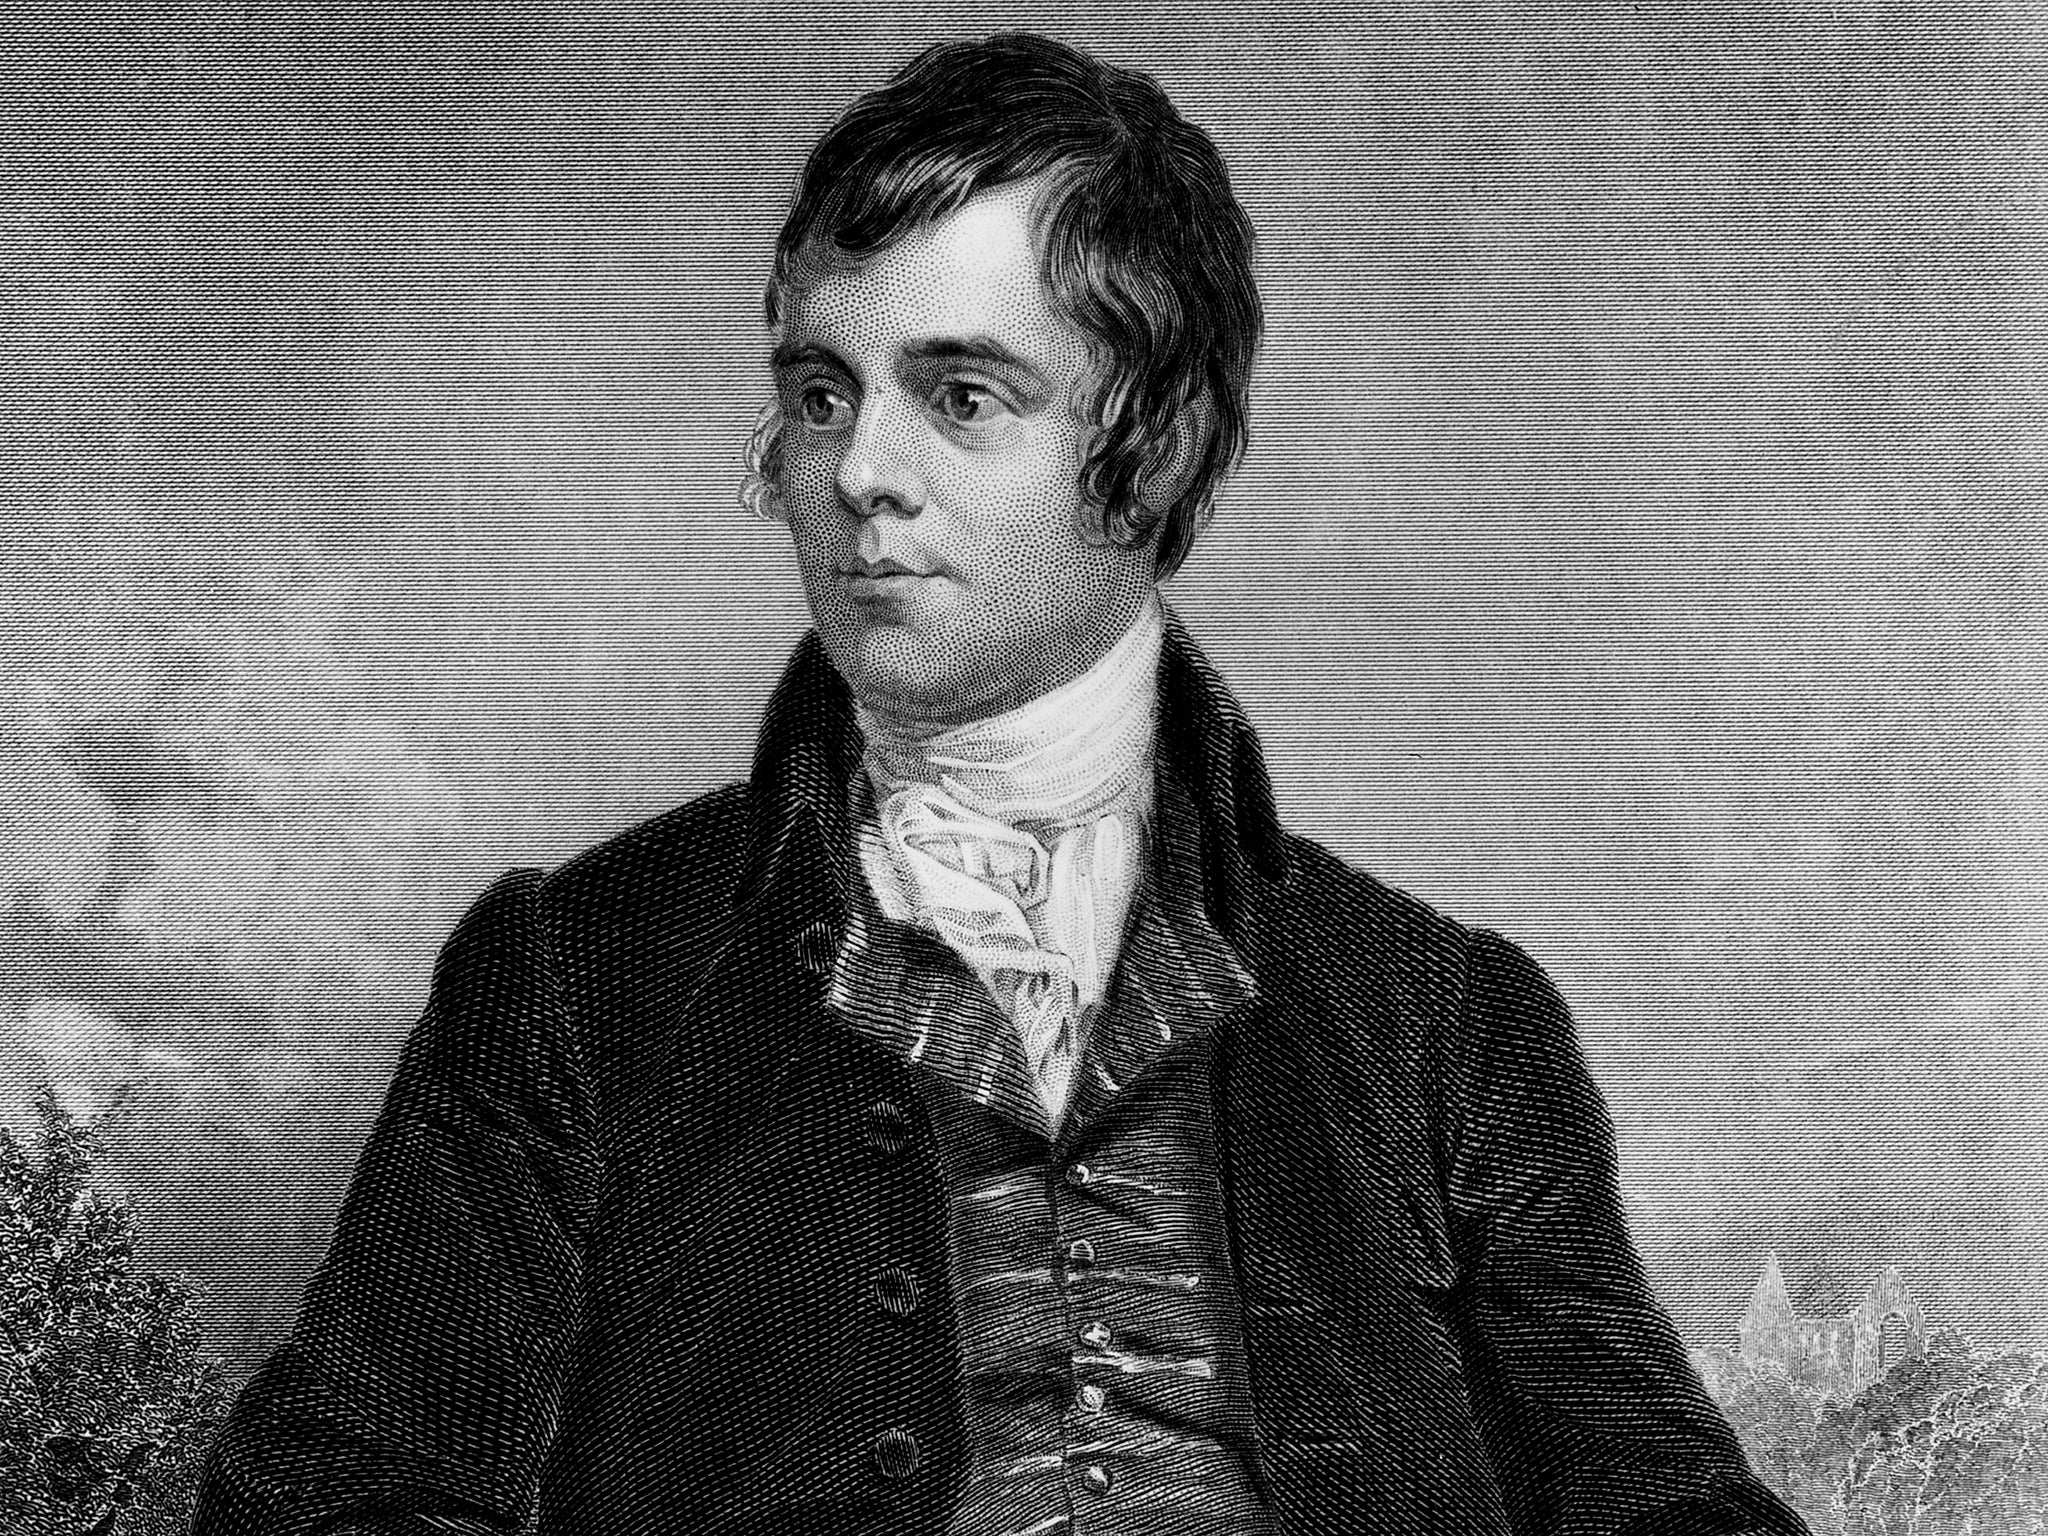 Robert Burns’ legacy as a moving force in Scotland’s history has almost dissolved